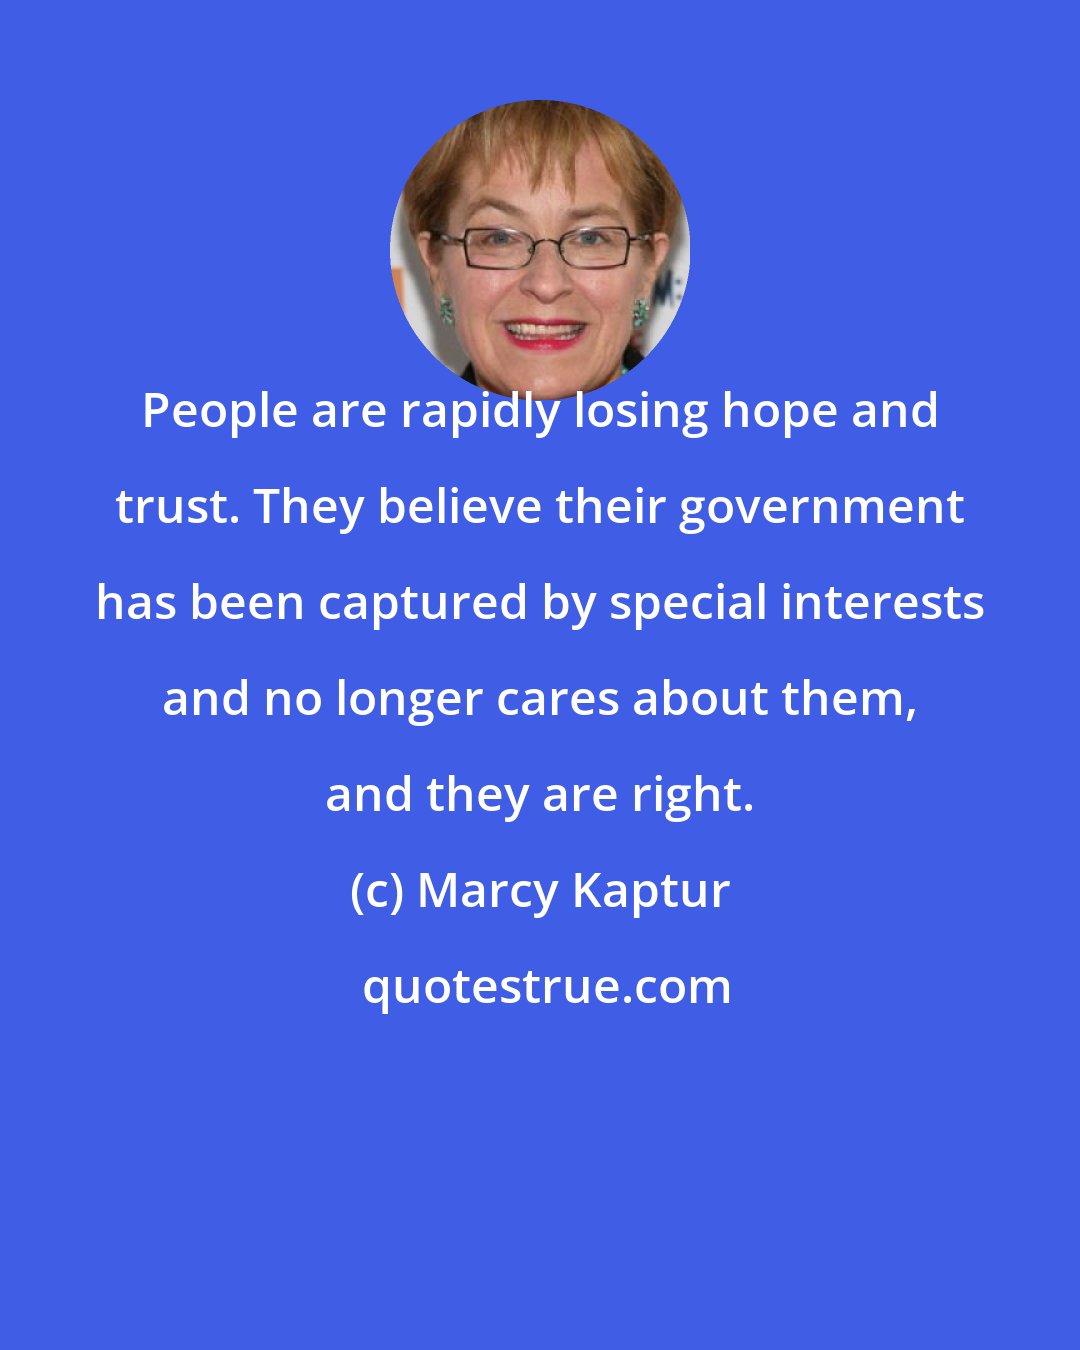 Marcy Kaptur: People are rapidly losing hope and trust. They believe their government has been captured by special interests and no longer cares about them, and they are right.